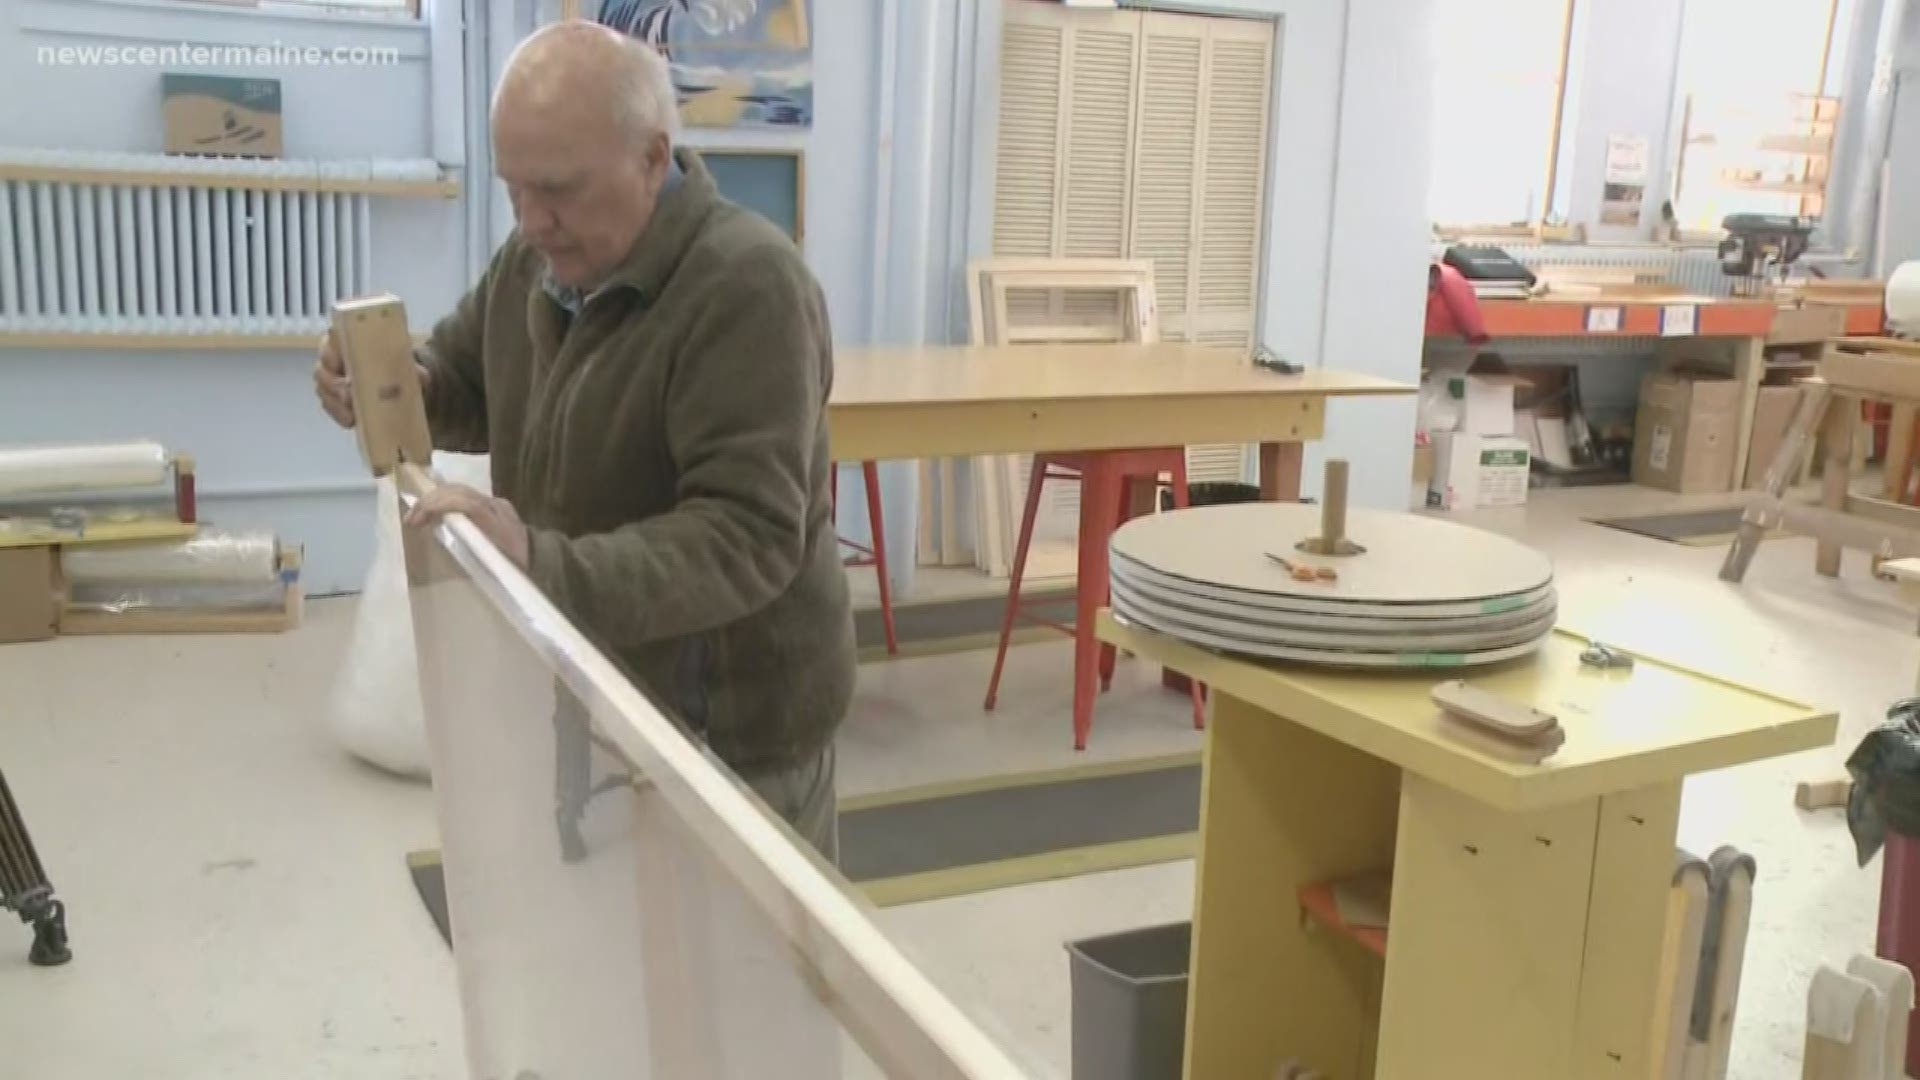 Volunteers build storm windows to help Mainers stay warm this winter season.